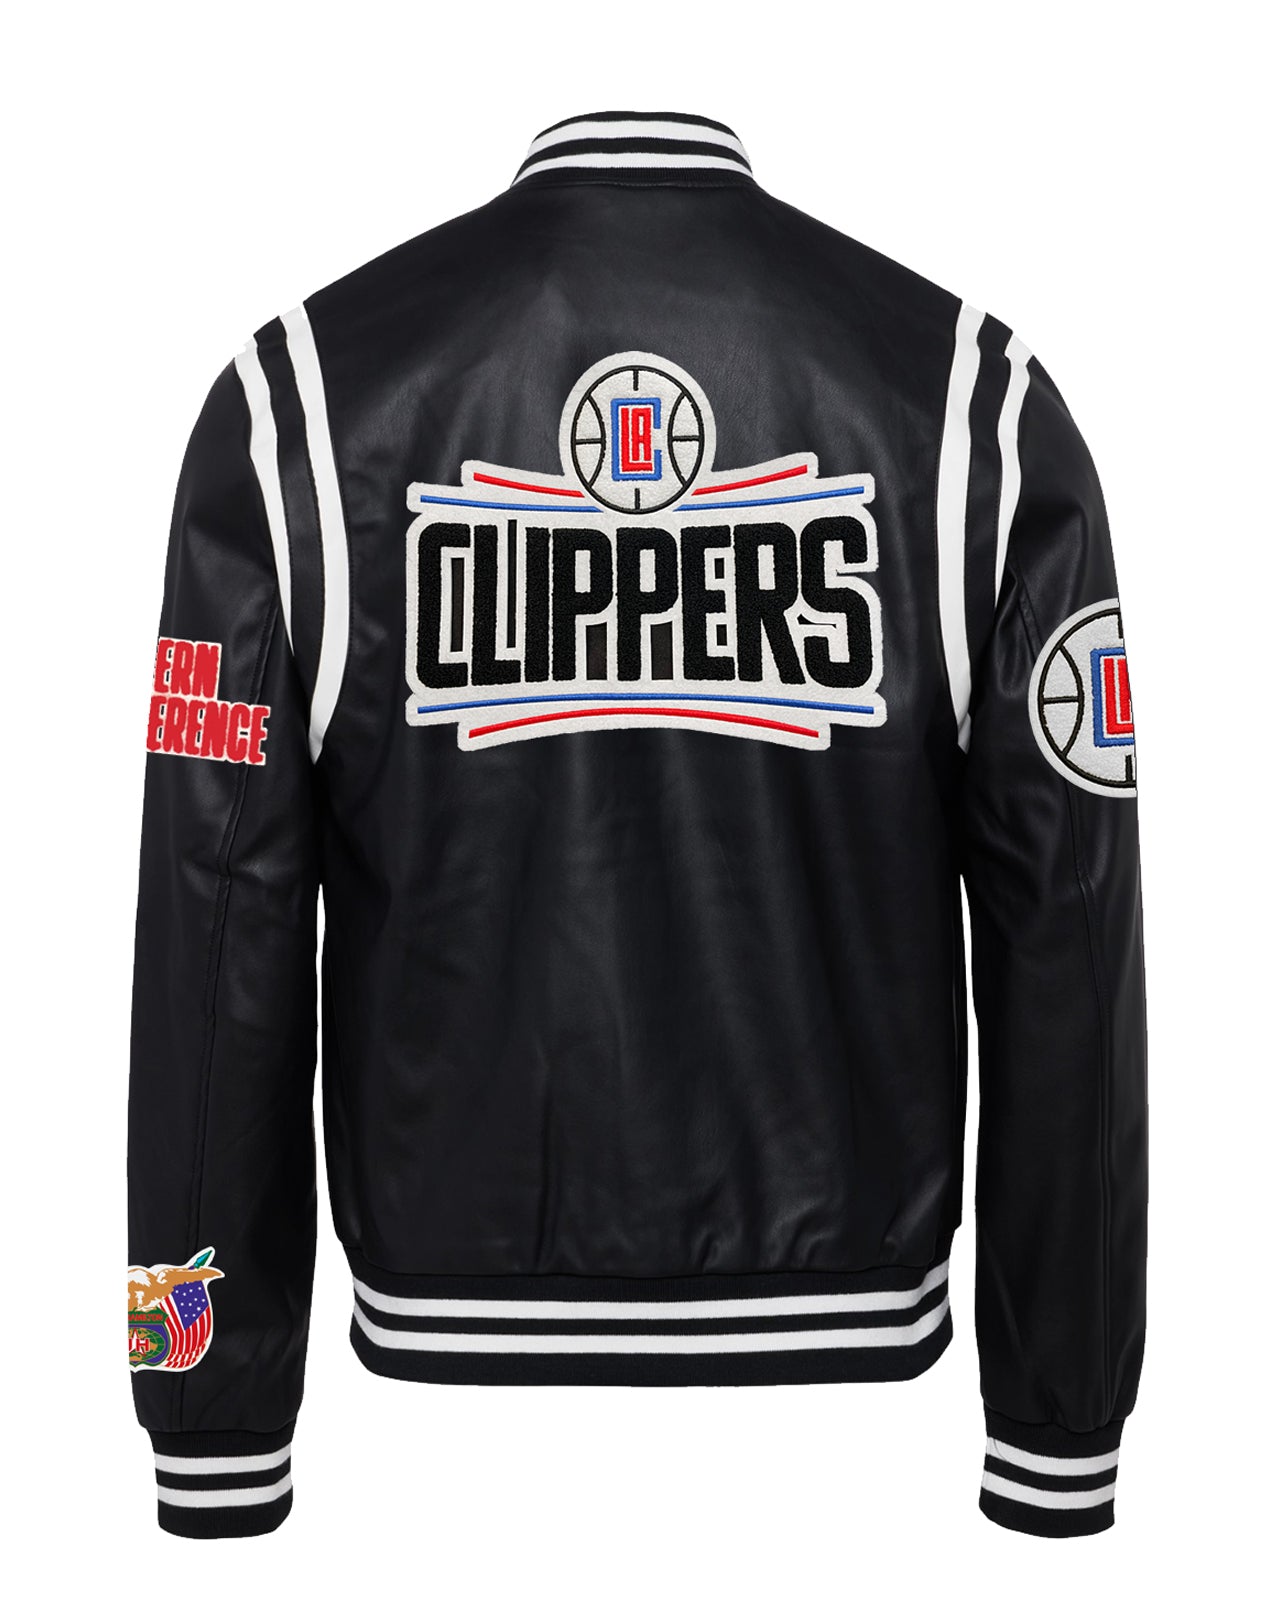 LOS ANGELES CLIPPERS VEGAN LEATHER JACKET Black / White